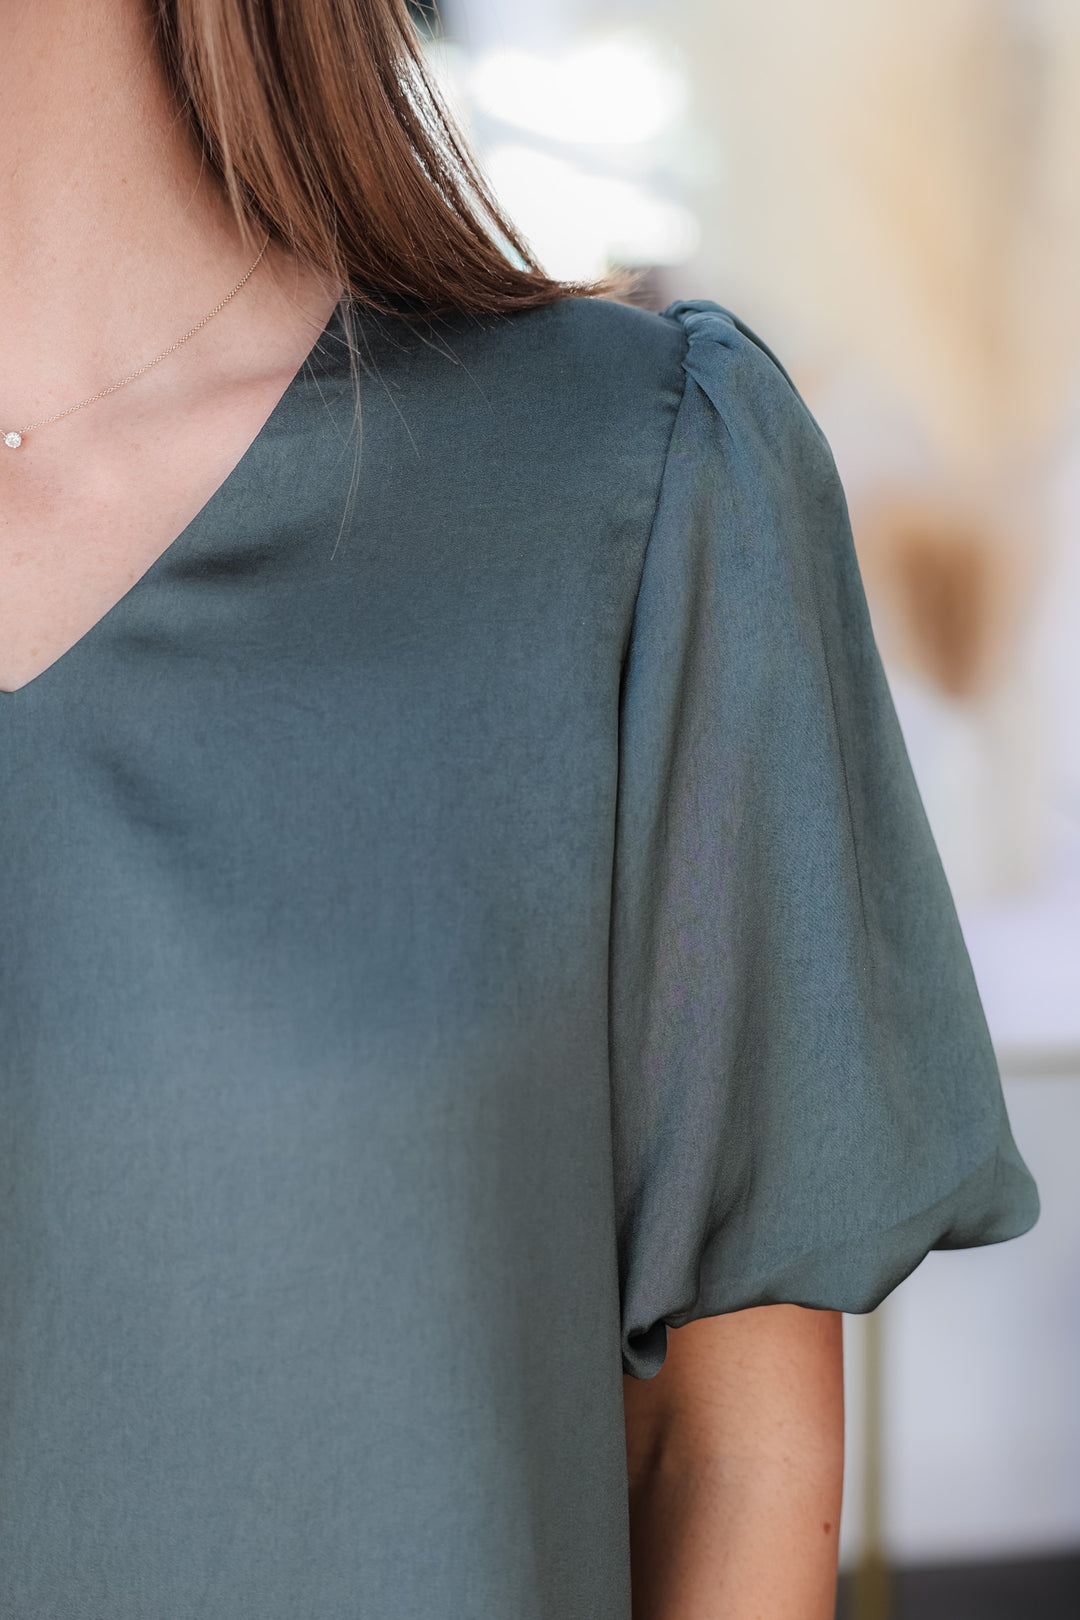 A closeup of the shoulder of a woman wearing an ash green, v neck, short bubble sleeve top.